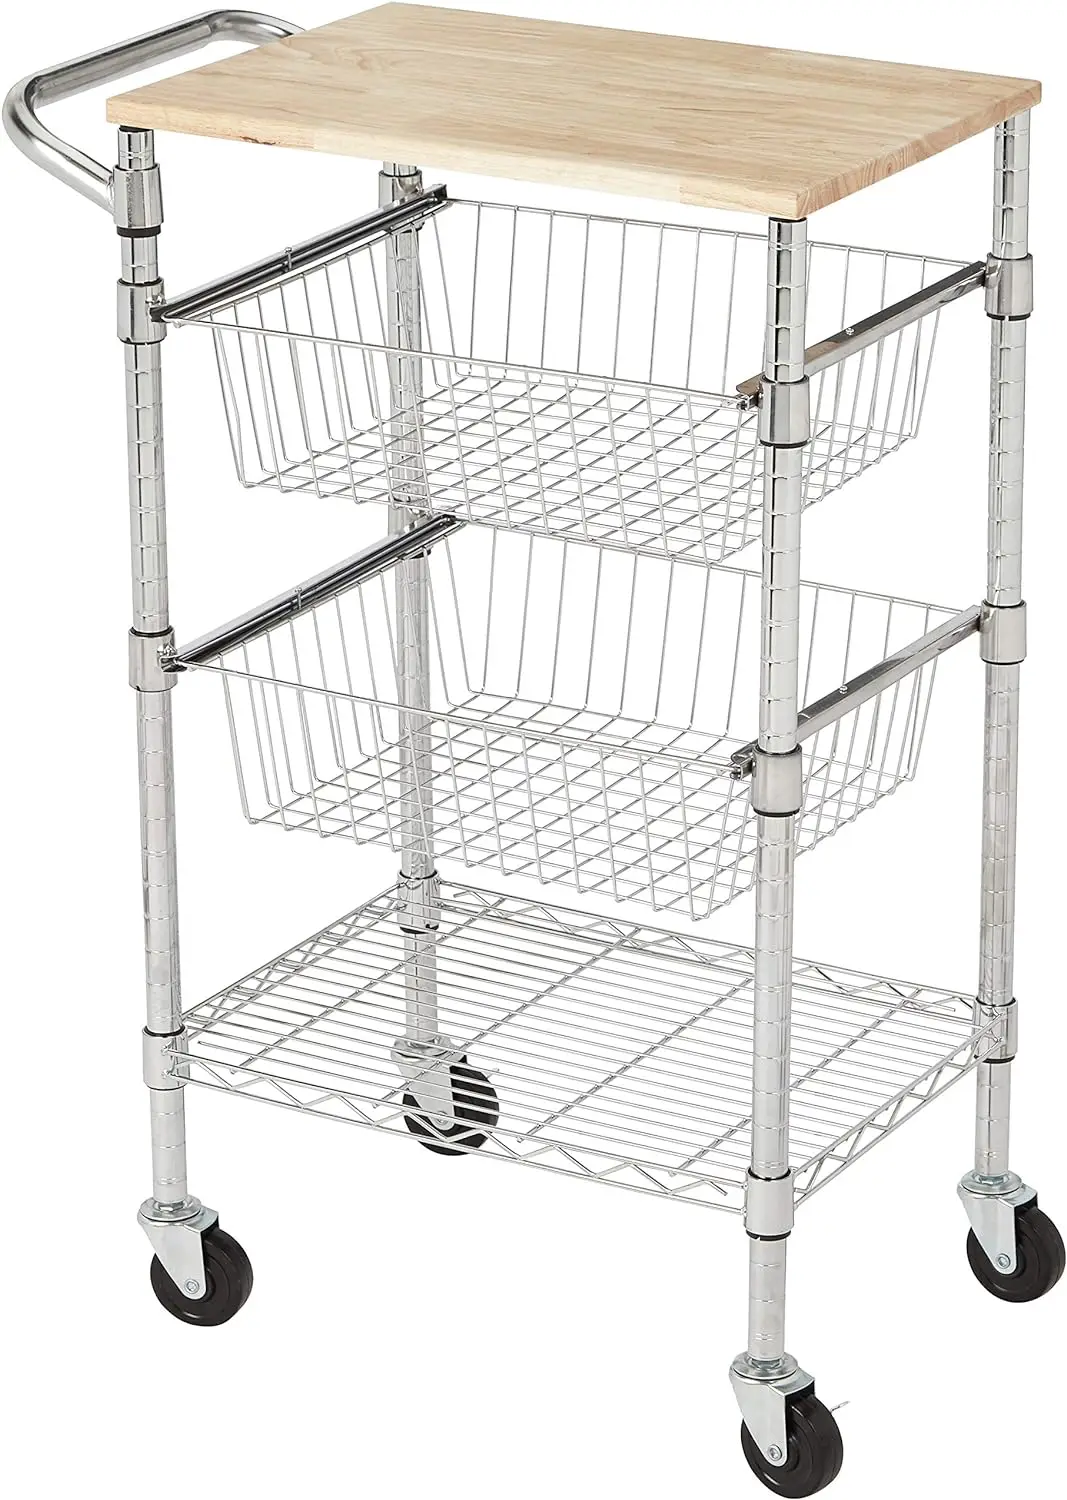 Basics 3-Tier Metal Basket Rolling Cart with Wood Top, Silver